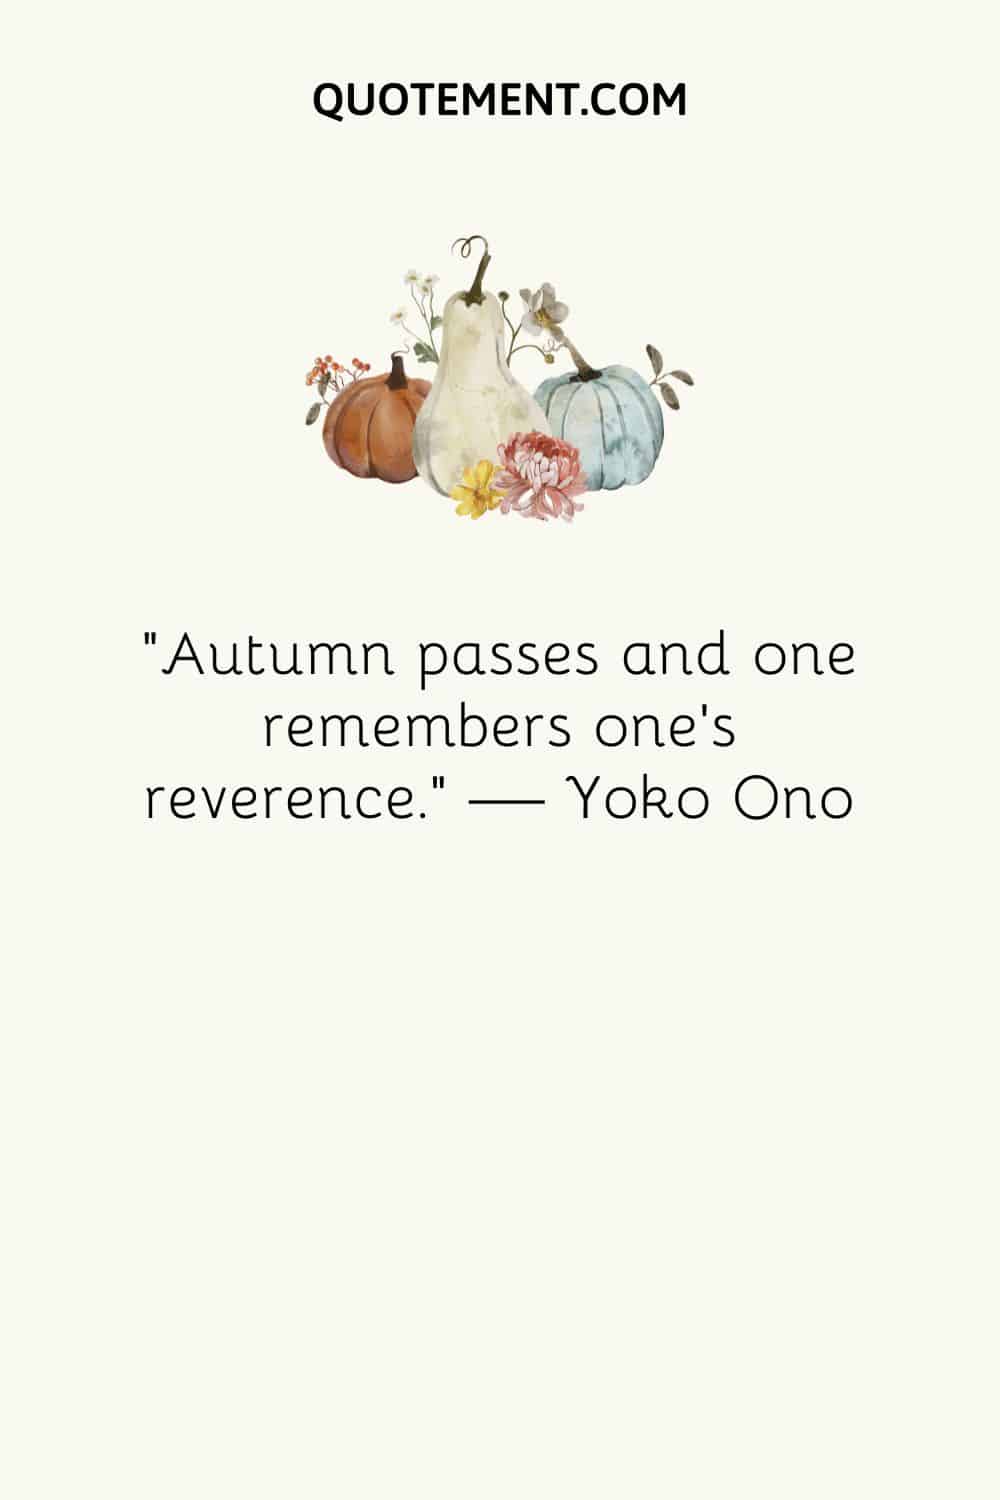 Autumn passes and one remembers one’s reverence